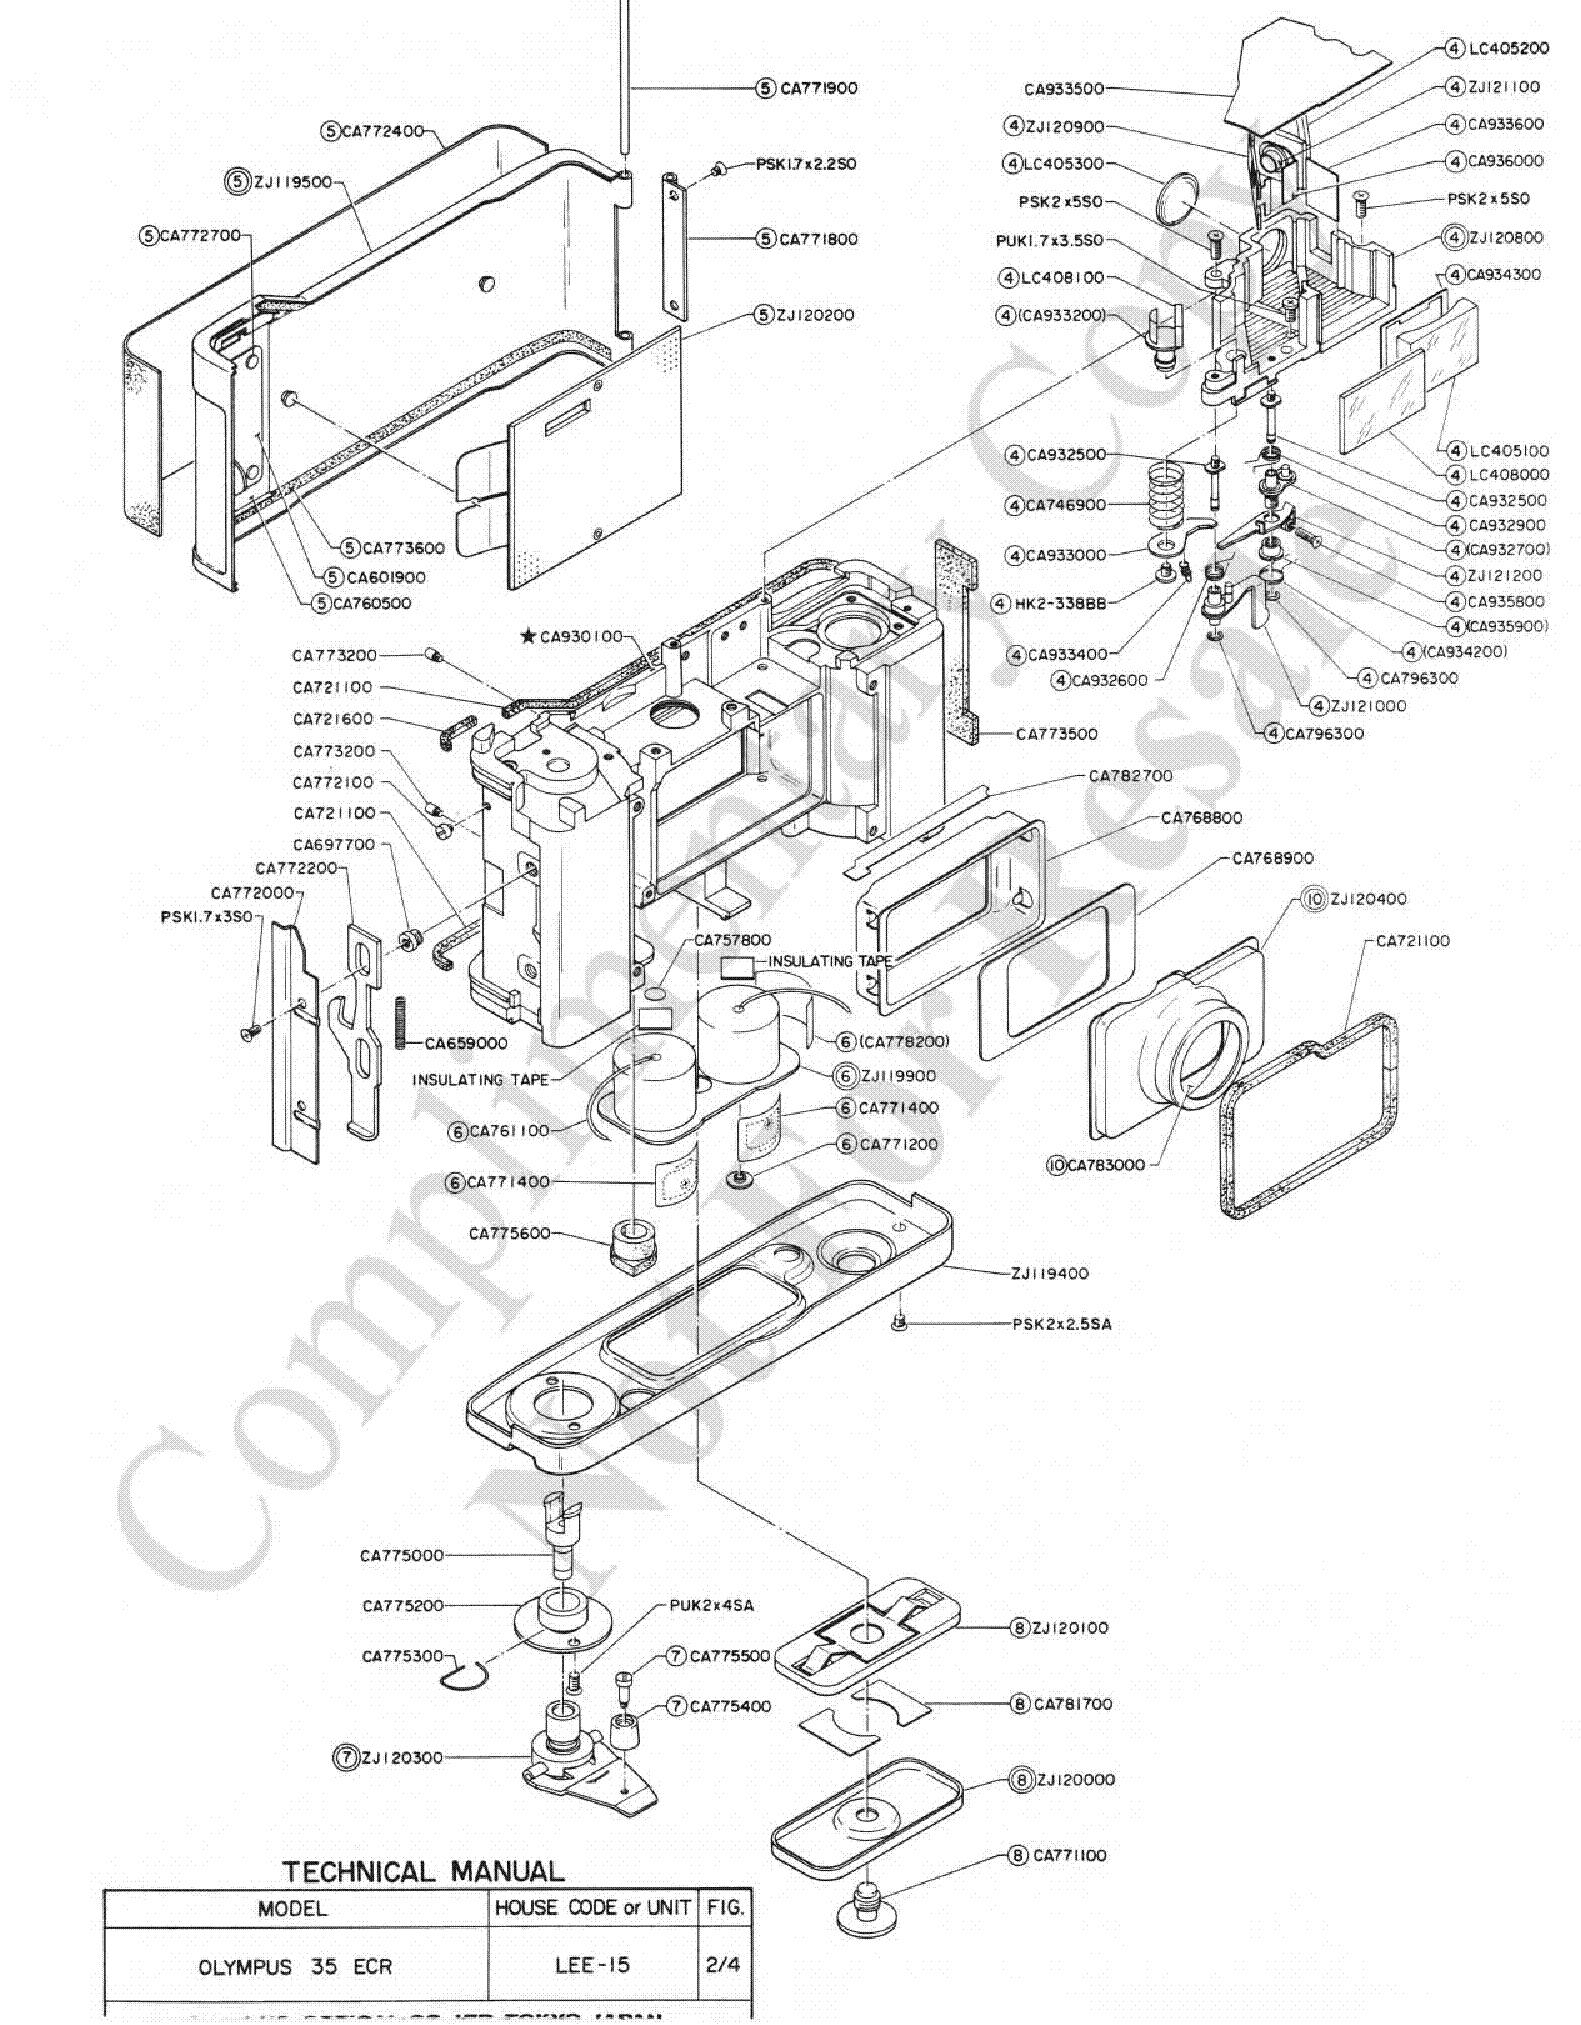 Exploded Parts Diagram